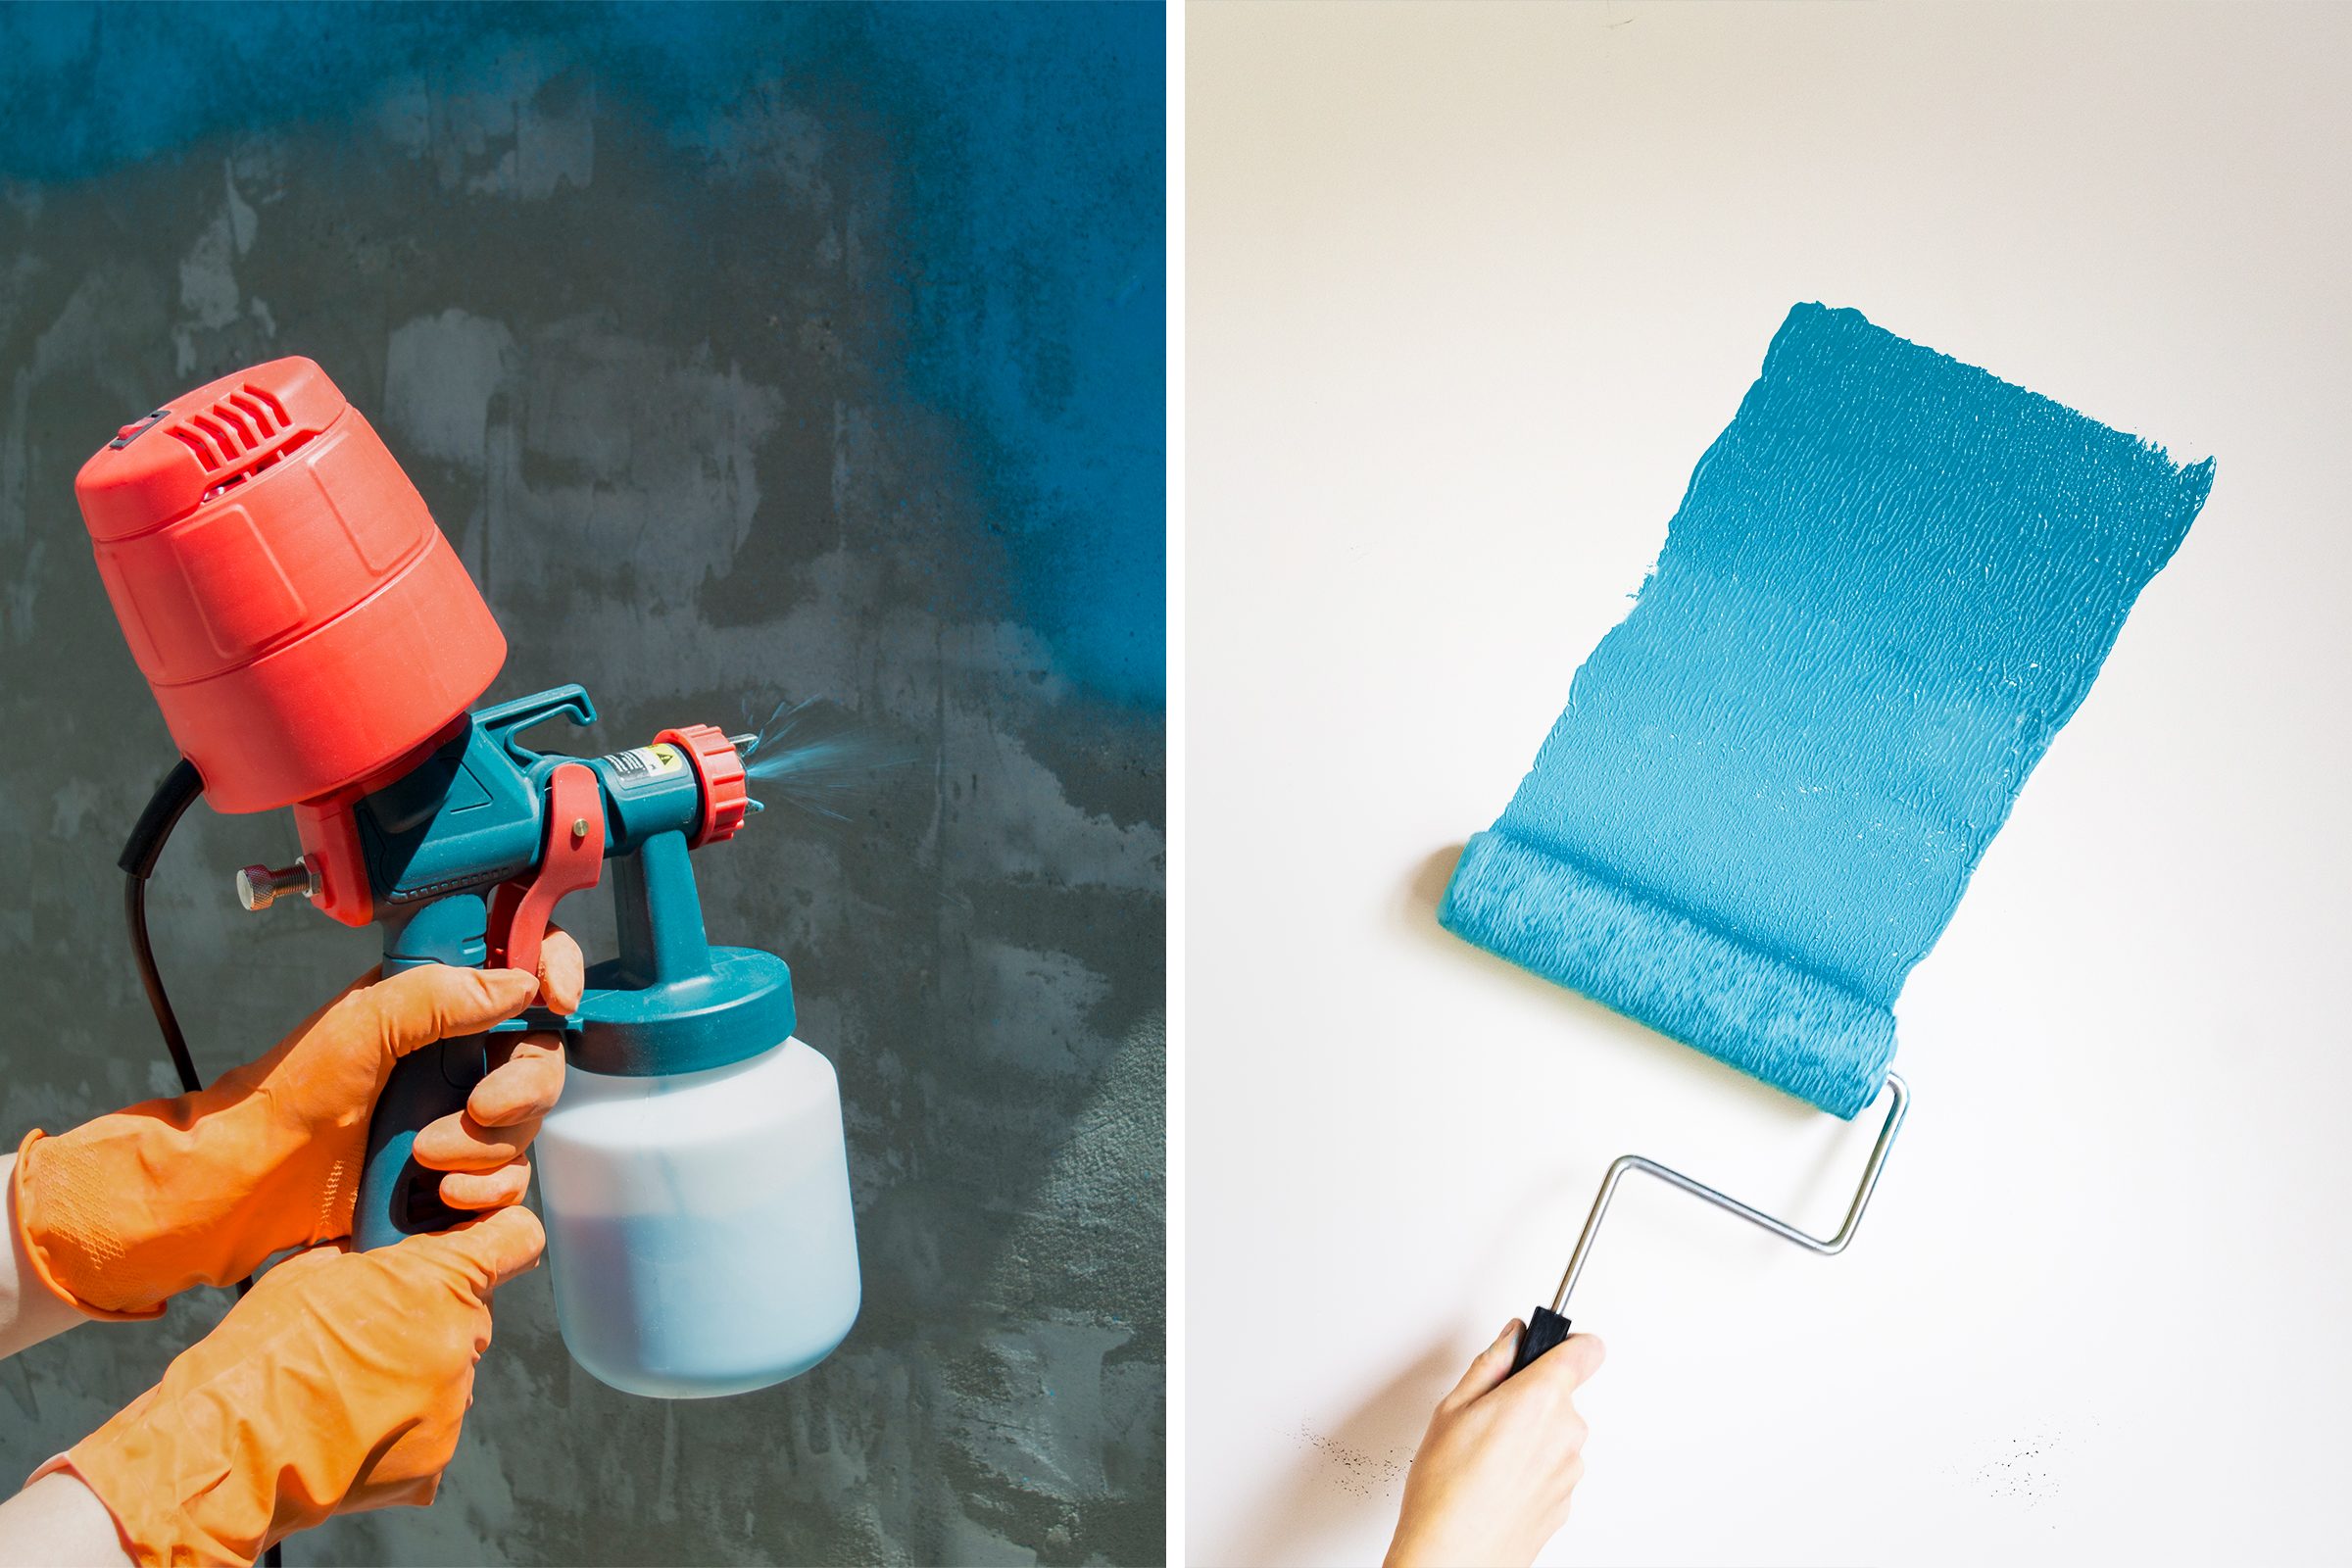 side by side comparison of a paint sprayer spaying teal paint onto a concrete wall and a paint roller painting teal paint onto a white wall